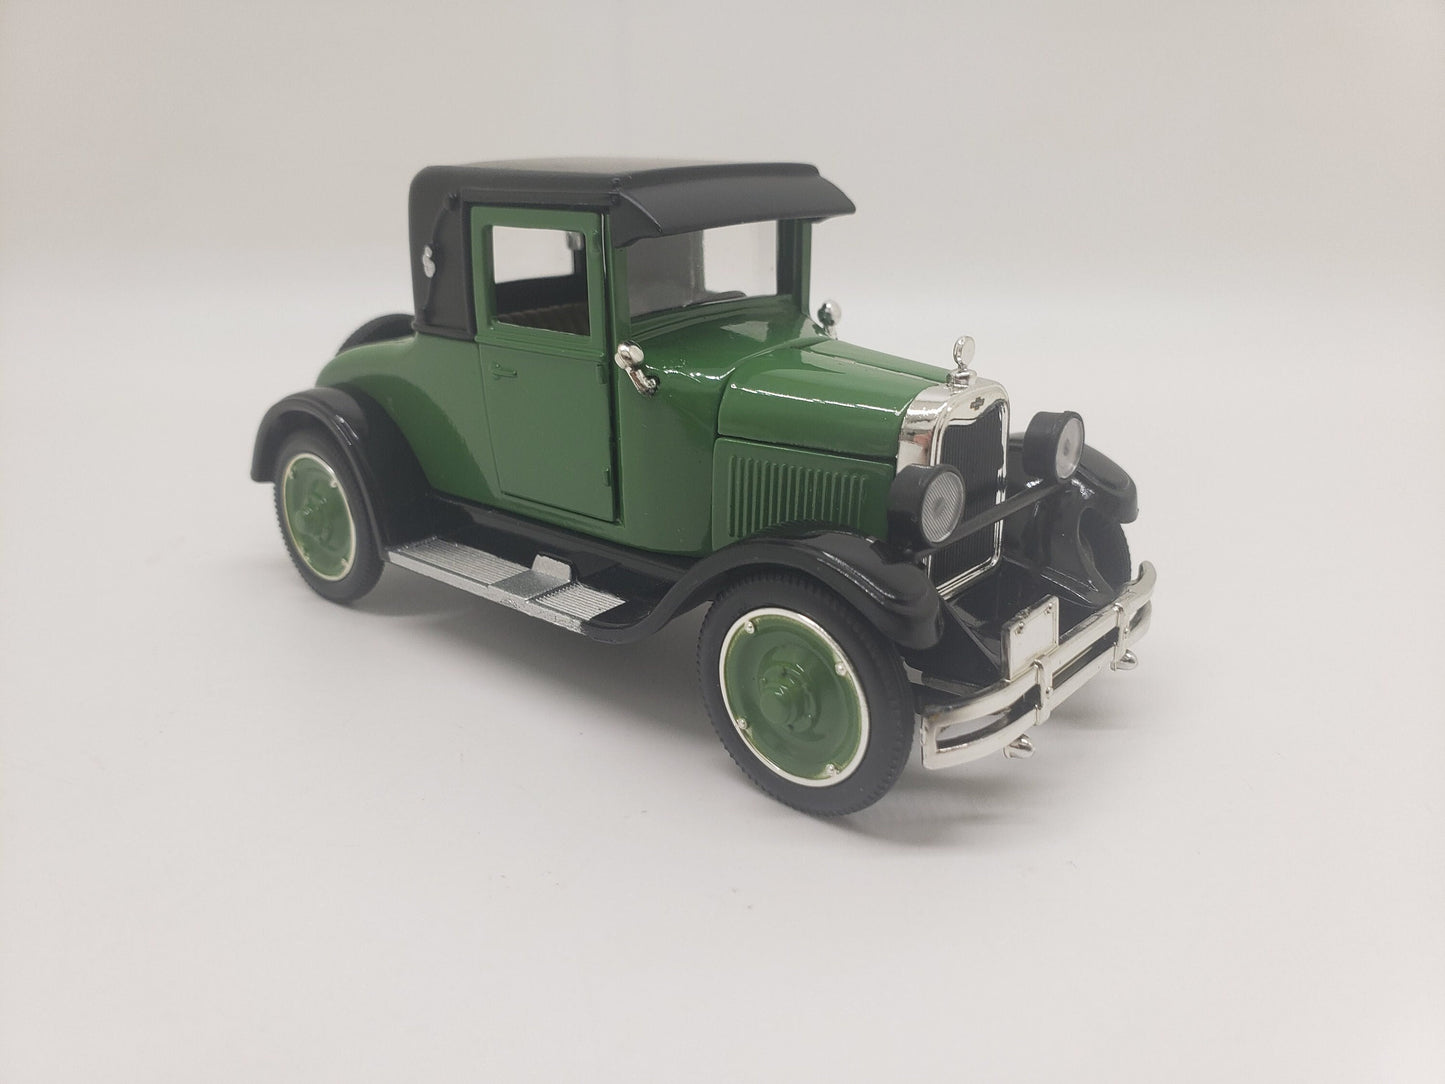 1926 Chevy Superior V2 Passenger Coupe Green New Ray Collectable 1:32 Scale Miniature Model Toy Car Perfect Birthday Gift